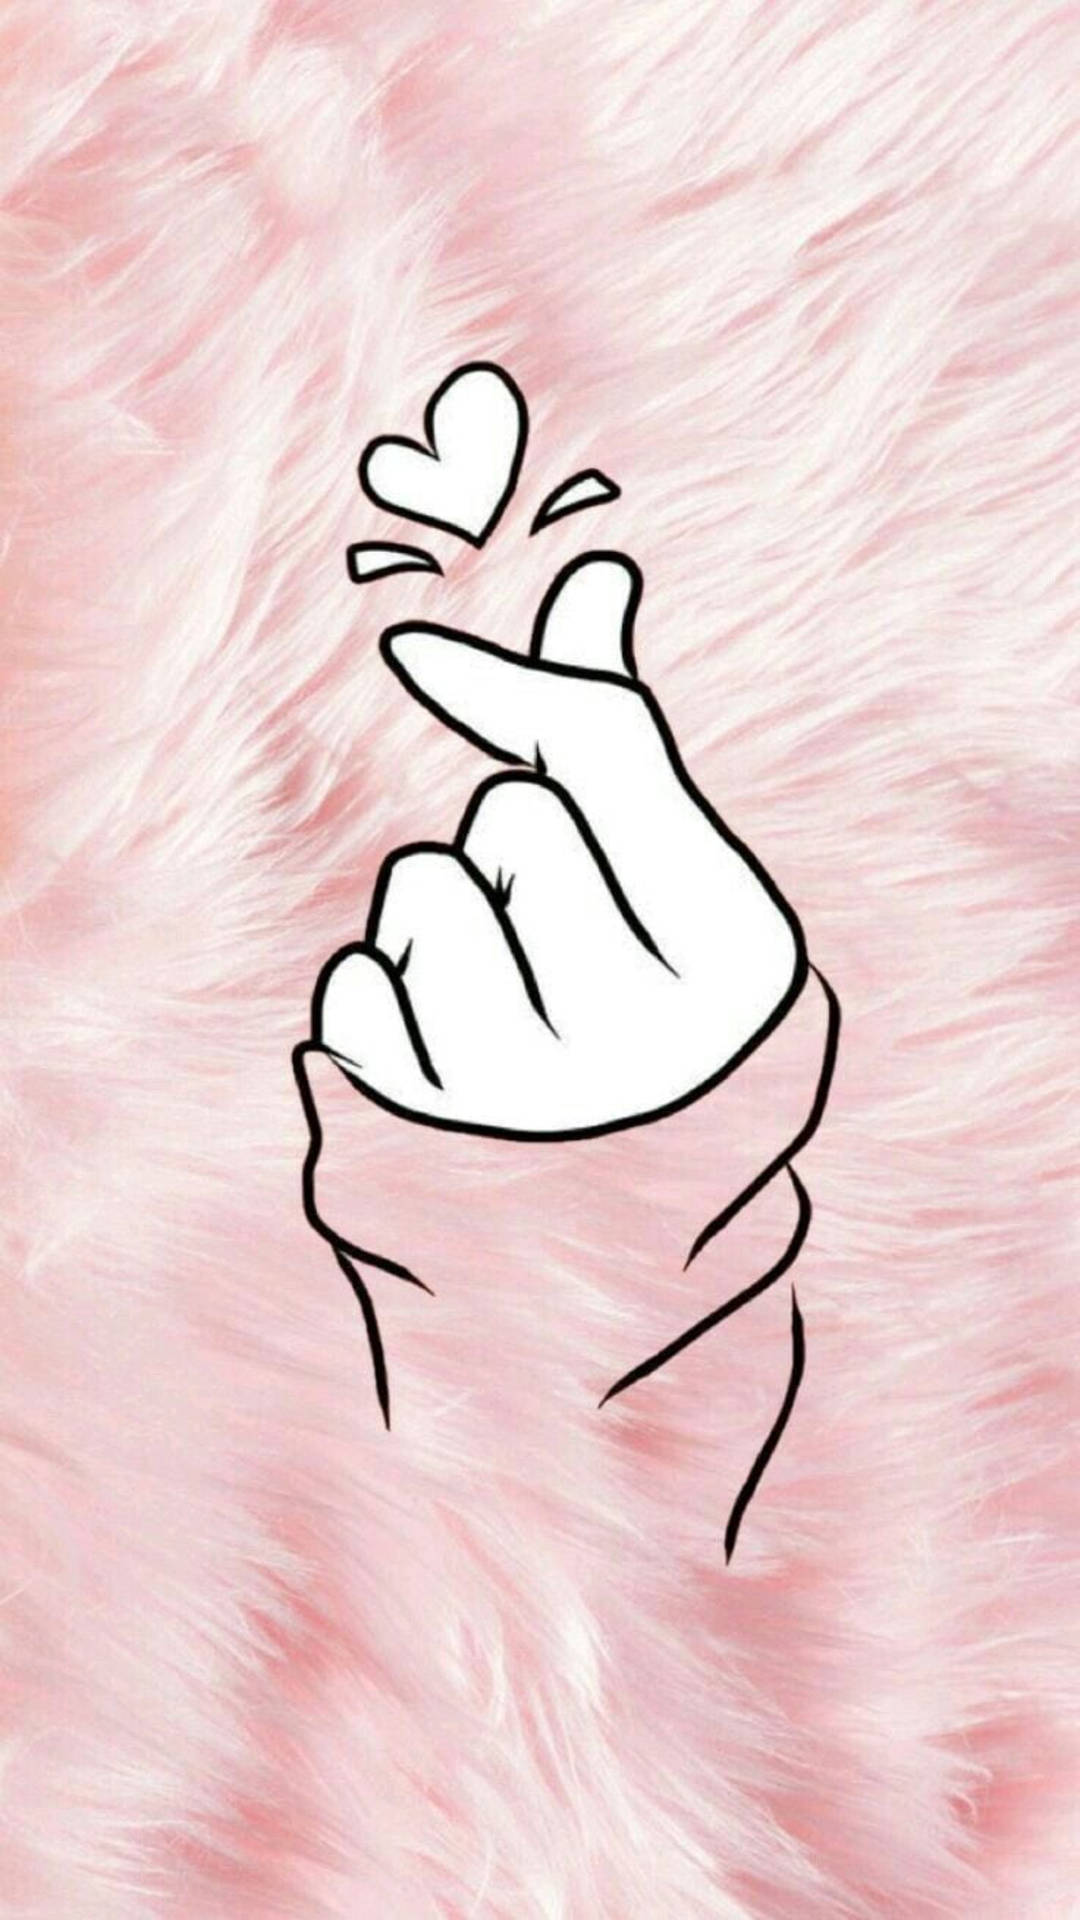 Saranghae Finger Heart On Pink Rug Picture